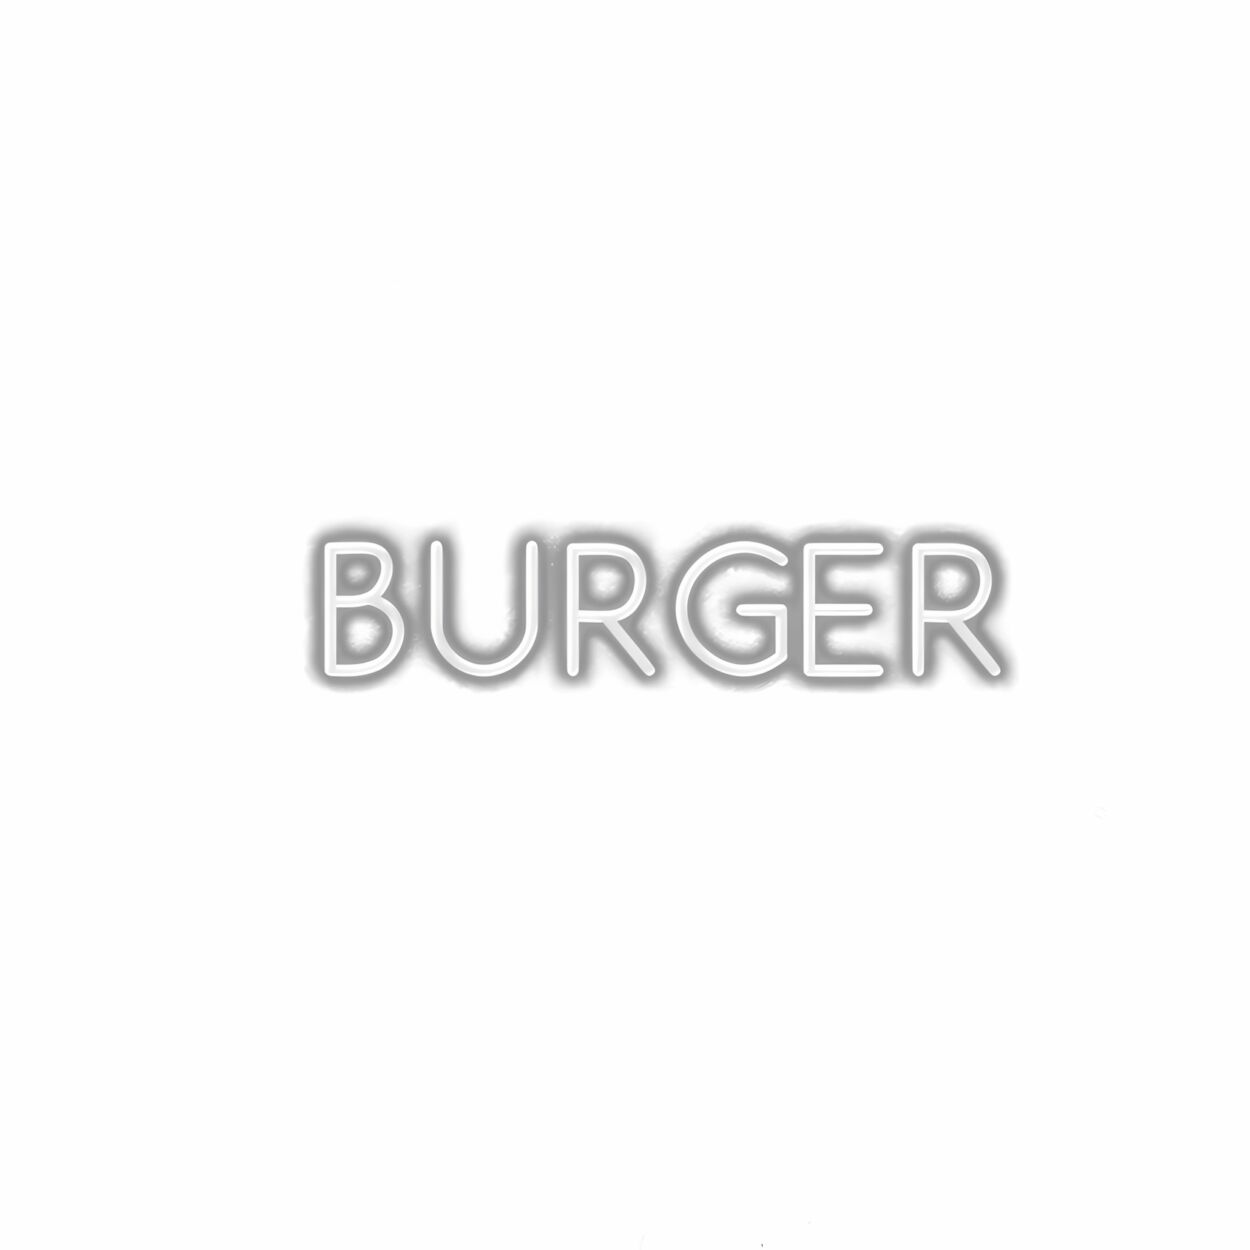 Embossed text spelling "BURGER" on white background.